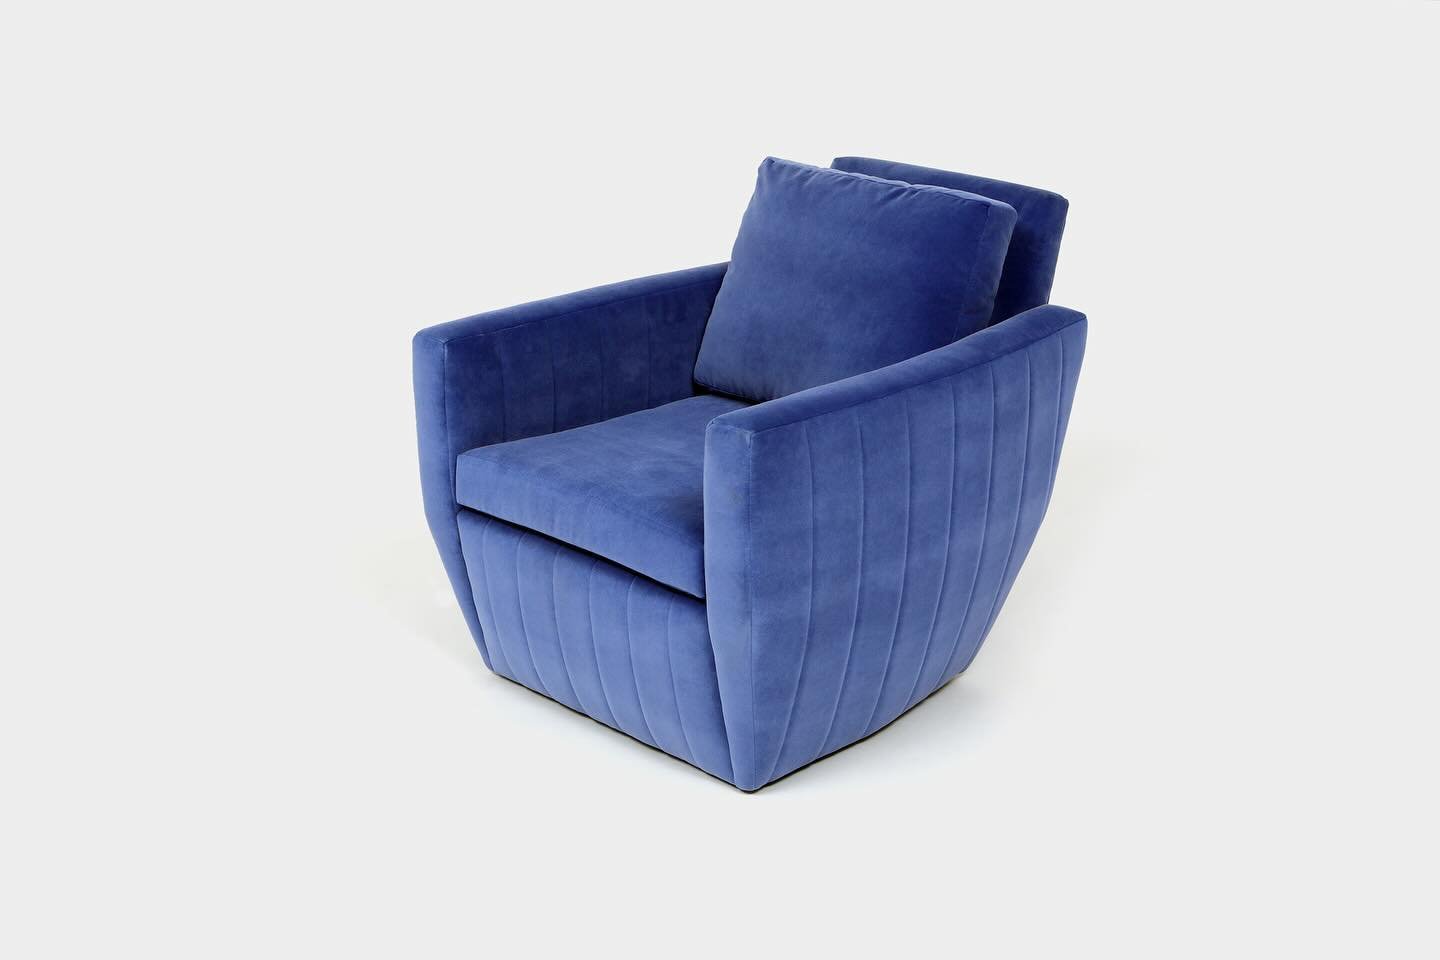 The Shelby Swivel chair available in Cobalt and Billiard on sale for an inventory special. 1 of each online now @collectiveselective .